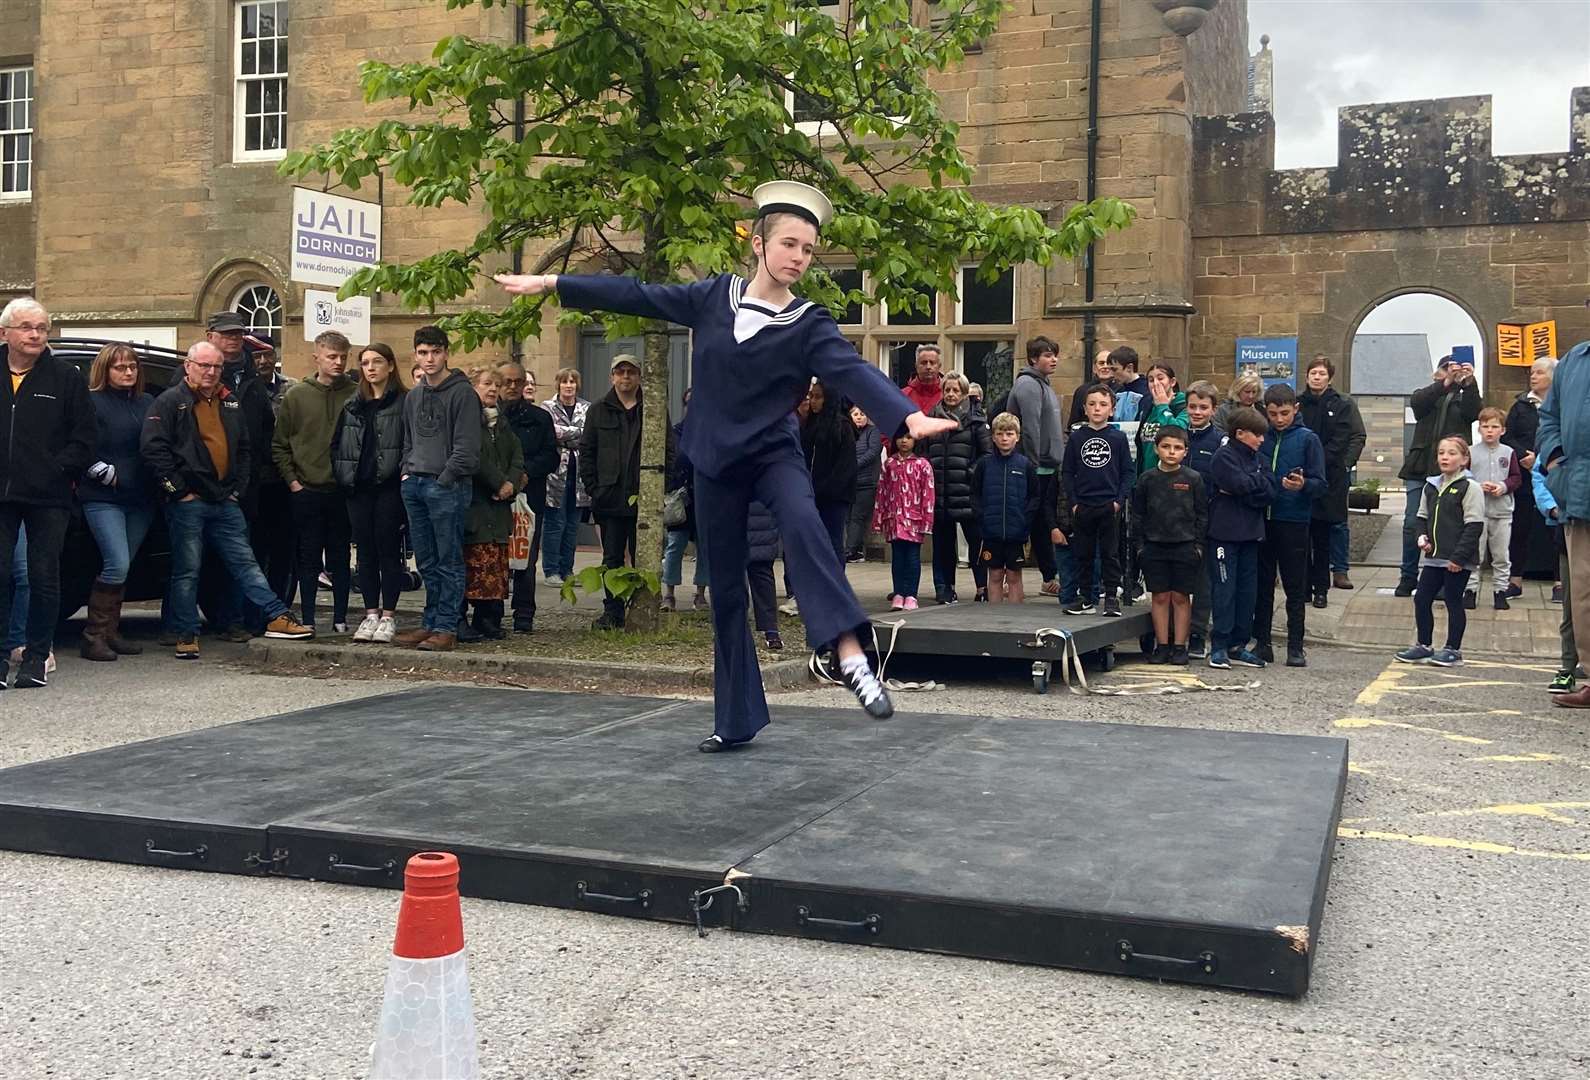 The parade was complimented by performances from Highland dancers. Photo: All Things Dornoch (Keely Webster)